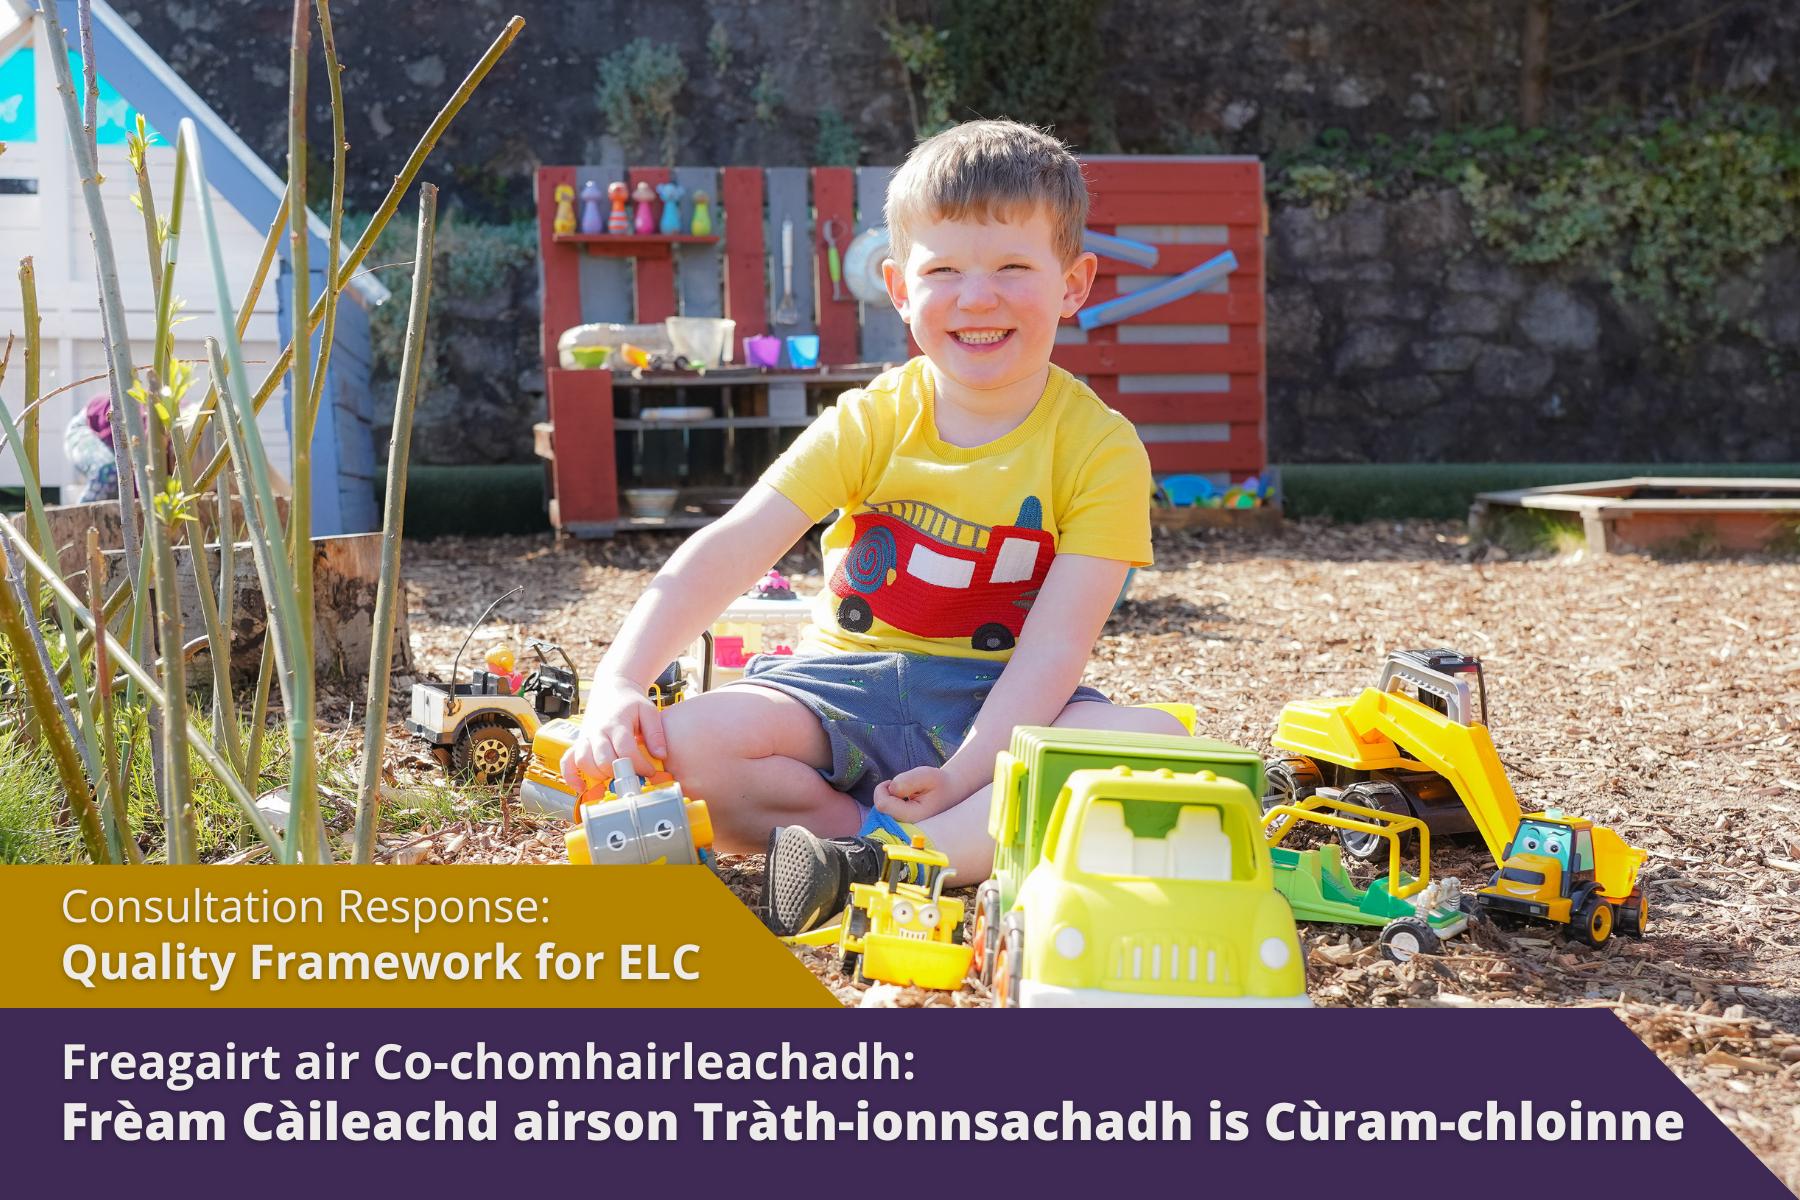 Picture: Young boy smiling while playing with toys with text of picture. Text reads 'Consultation Response: Quality Framework for ELC'